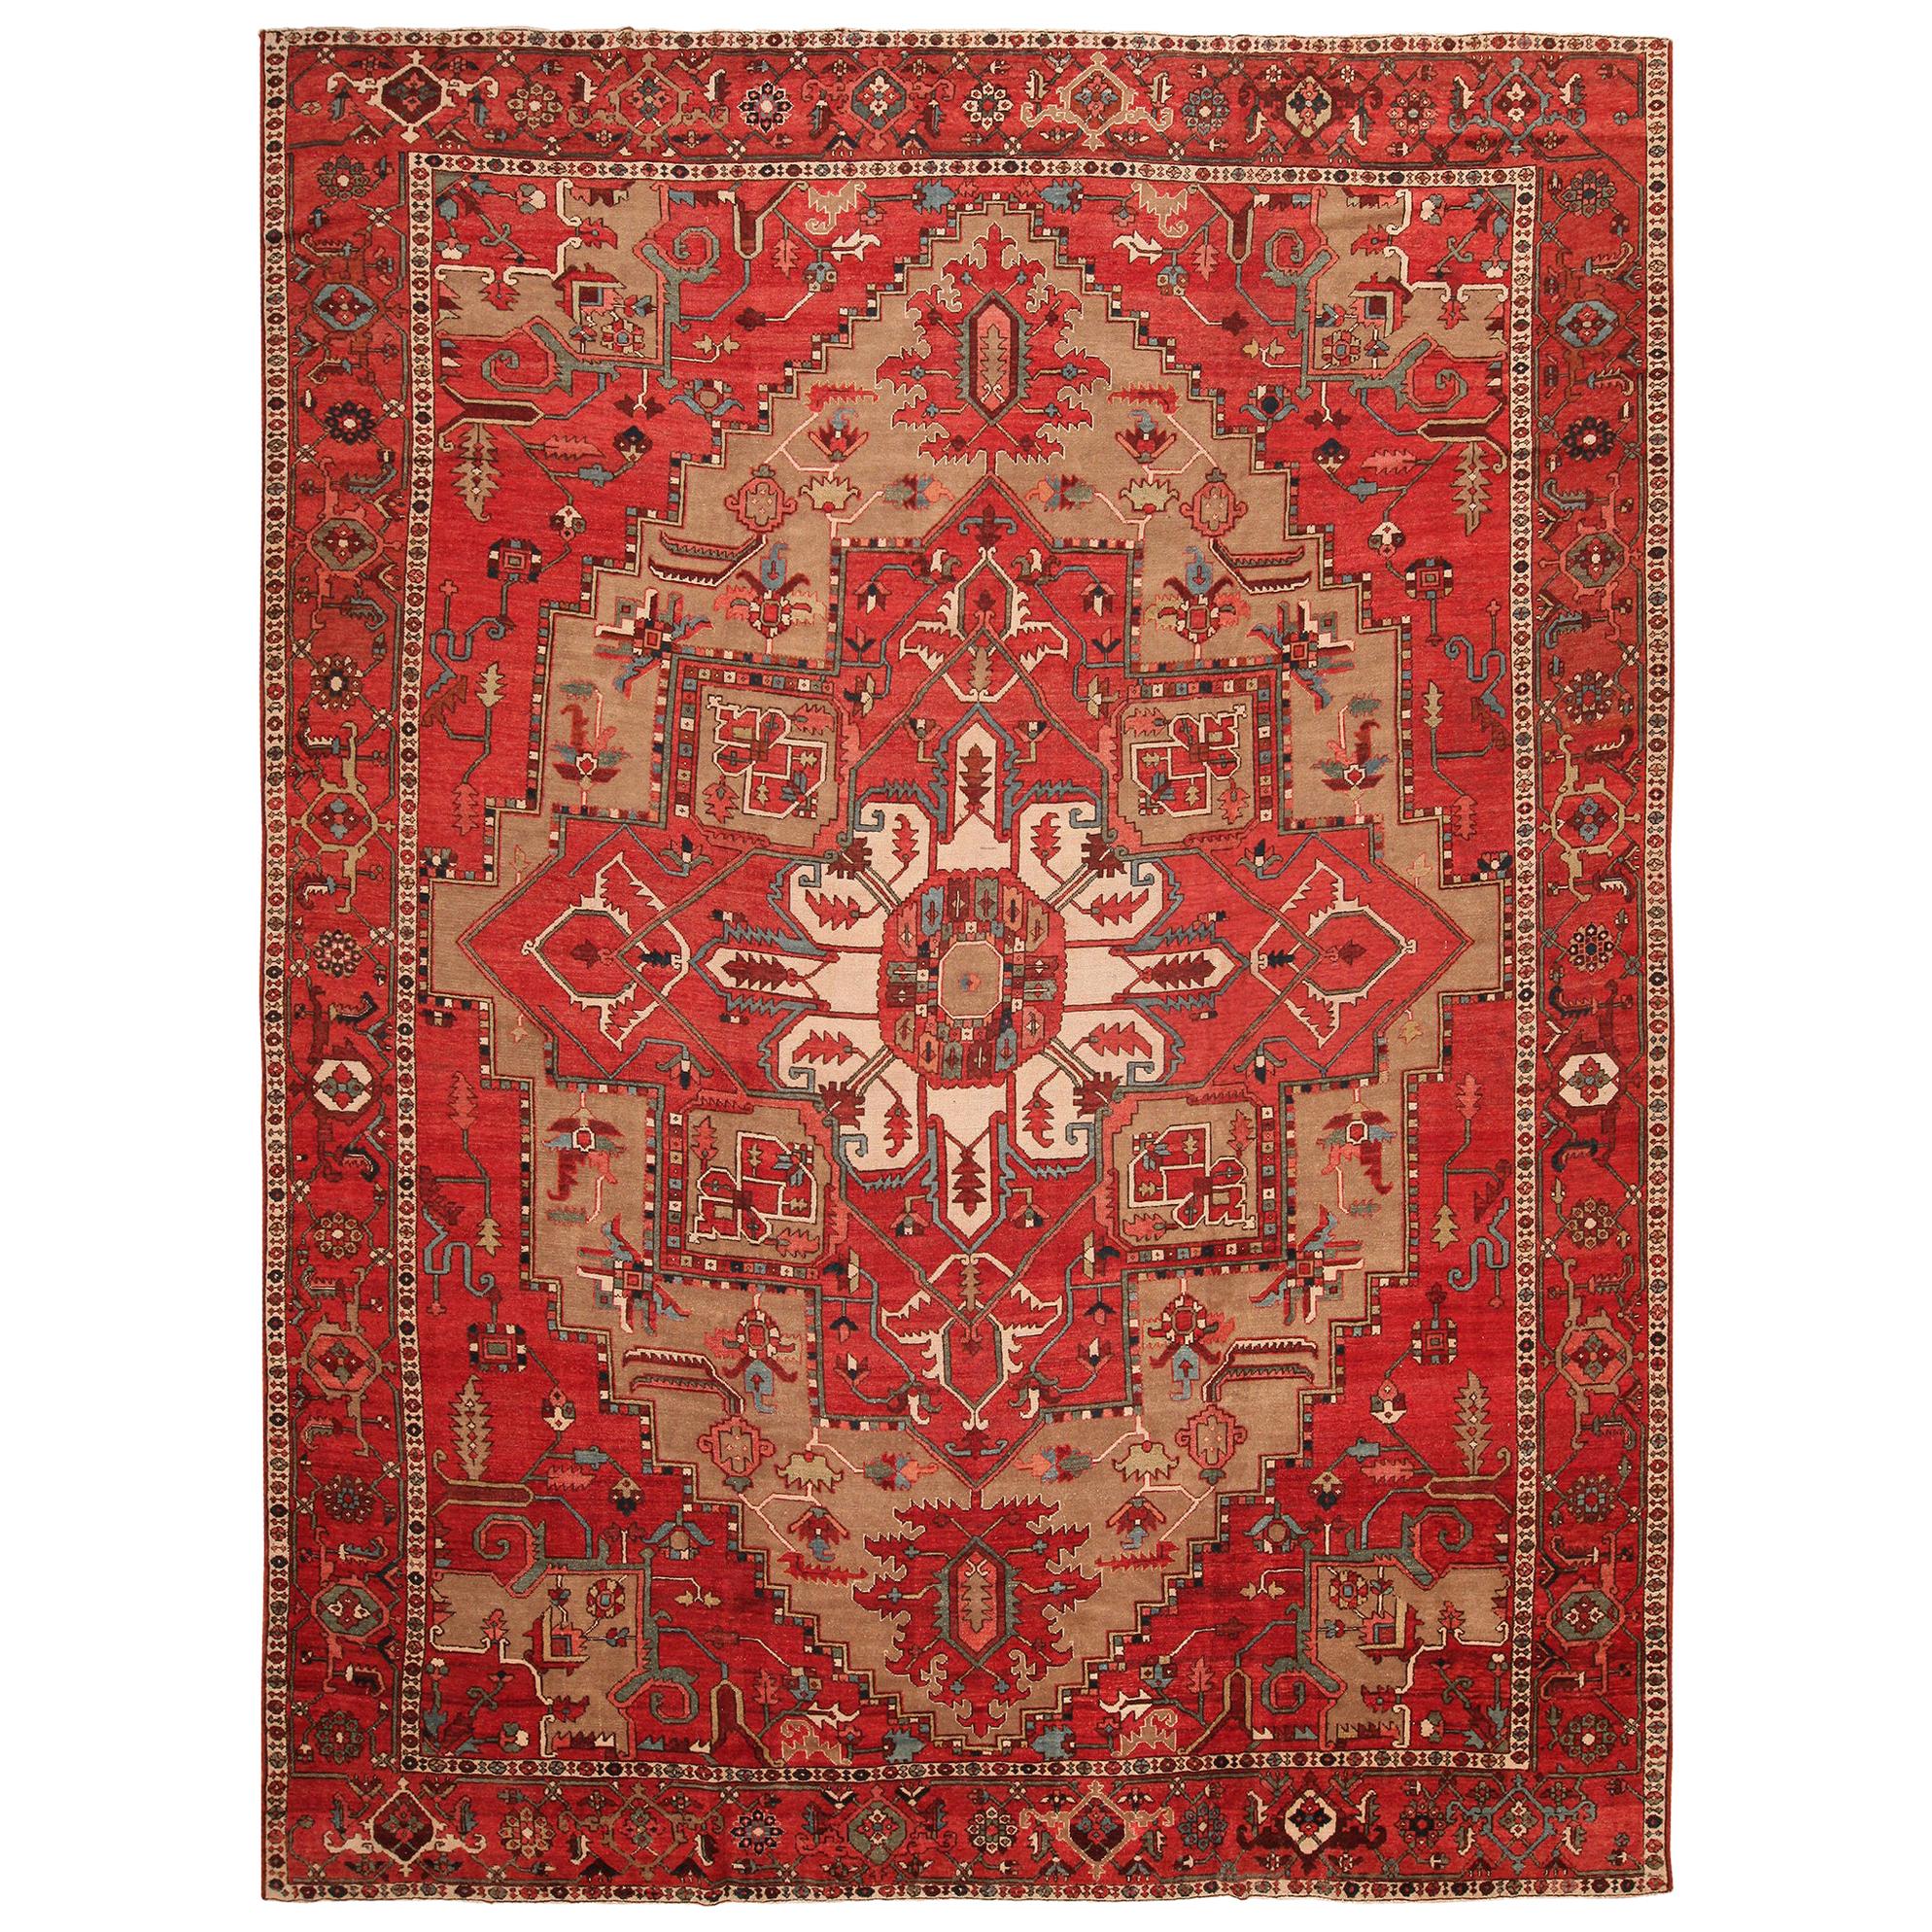 Antique Persian Serapi Rug. Size: 11 ft 6 in x 15 ft